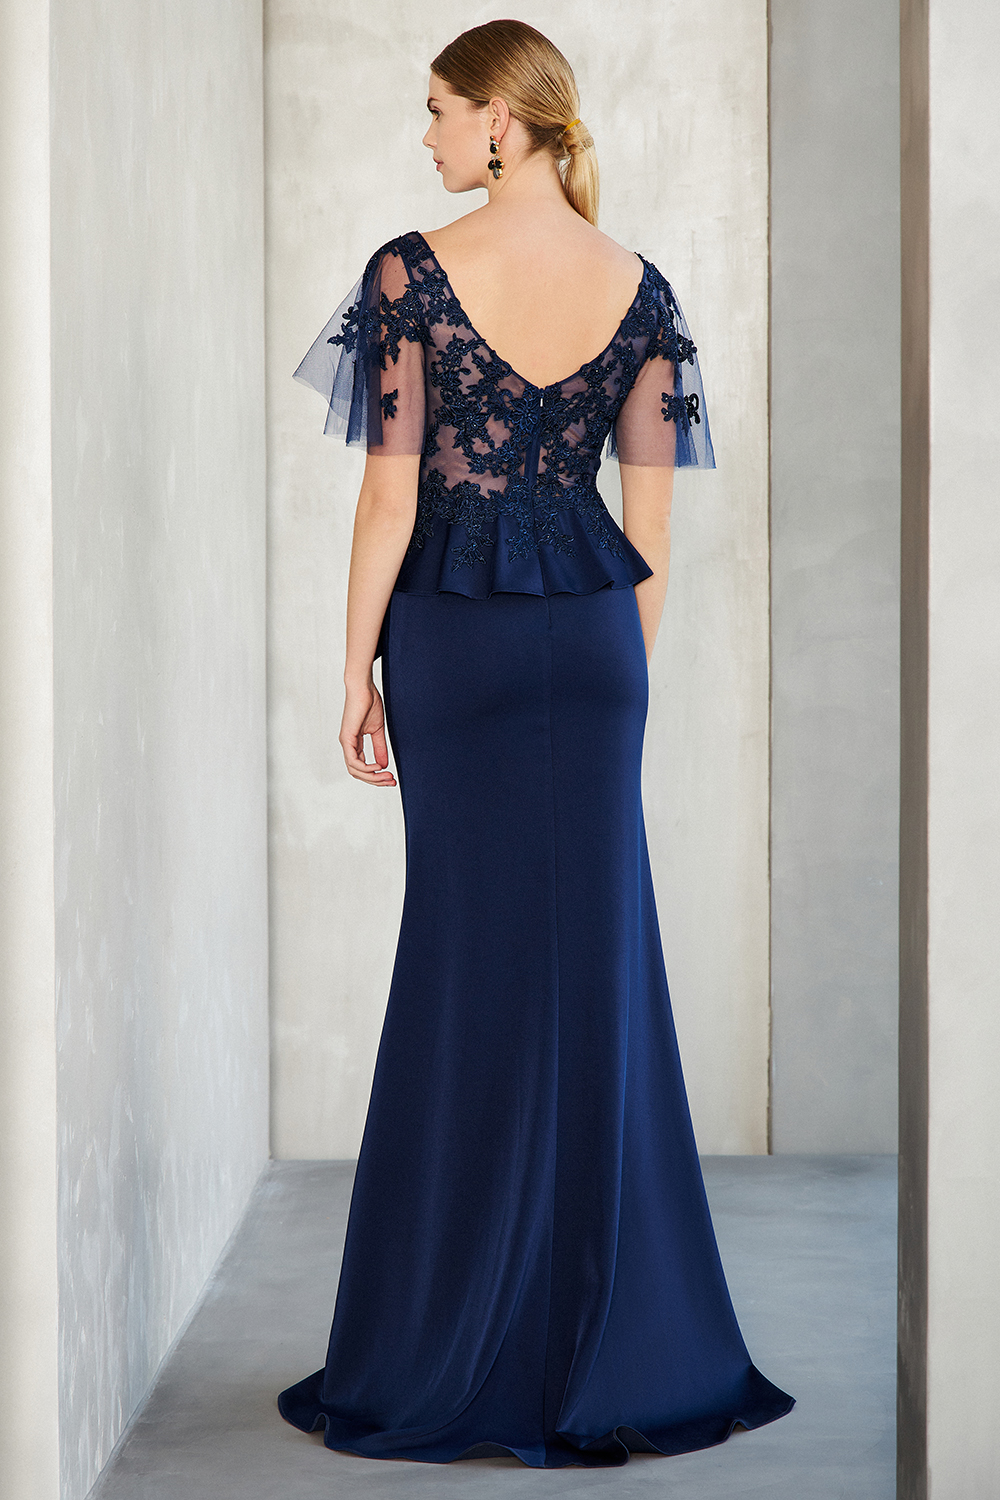 Long evening satin dress with beaded top and sleeves with tulle